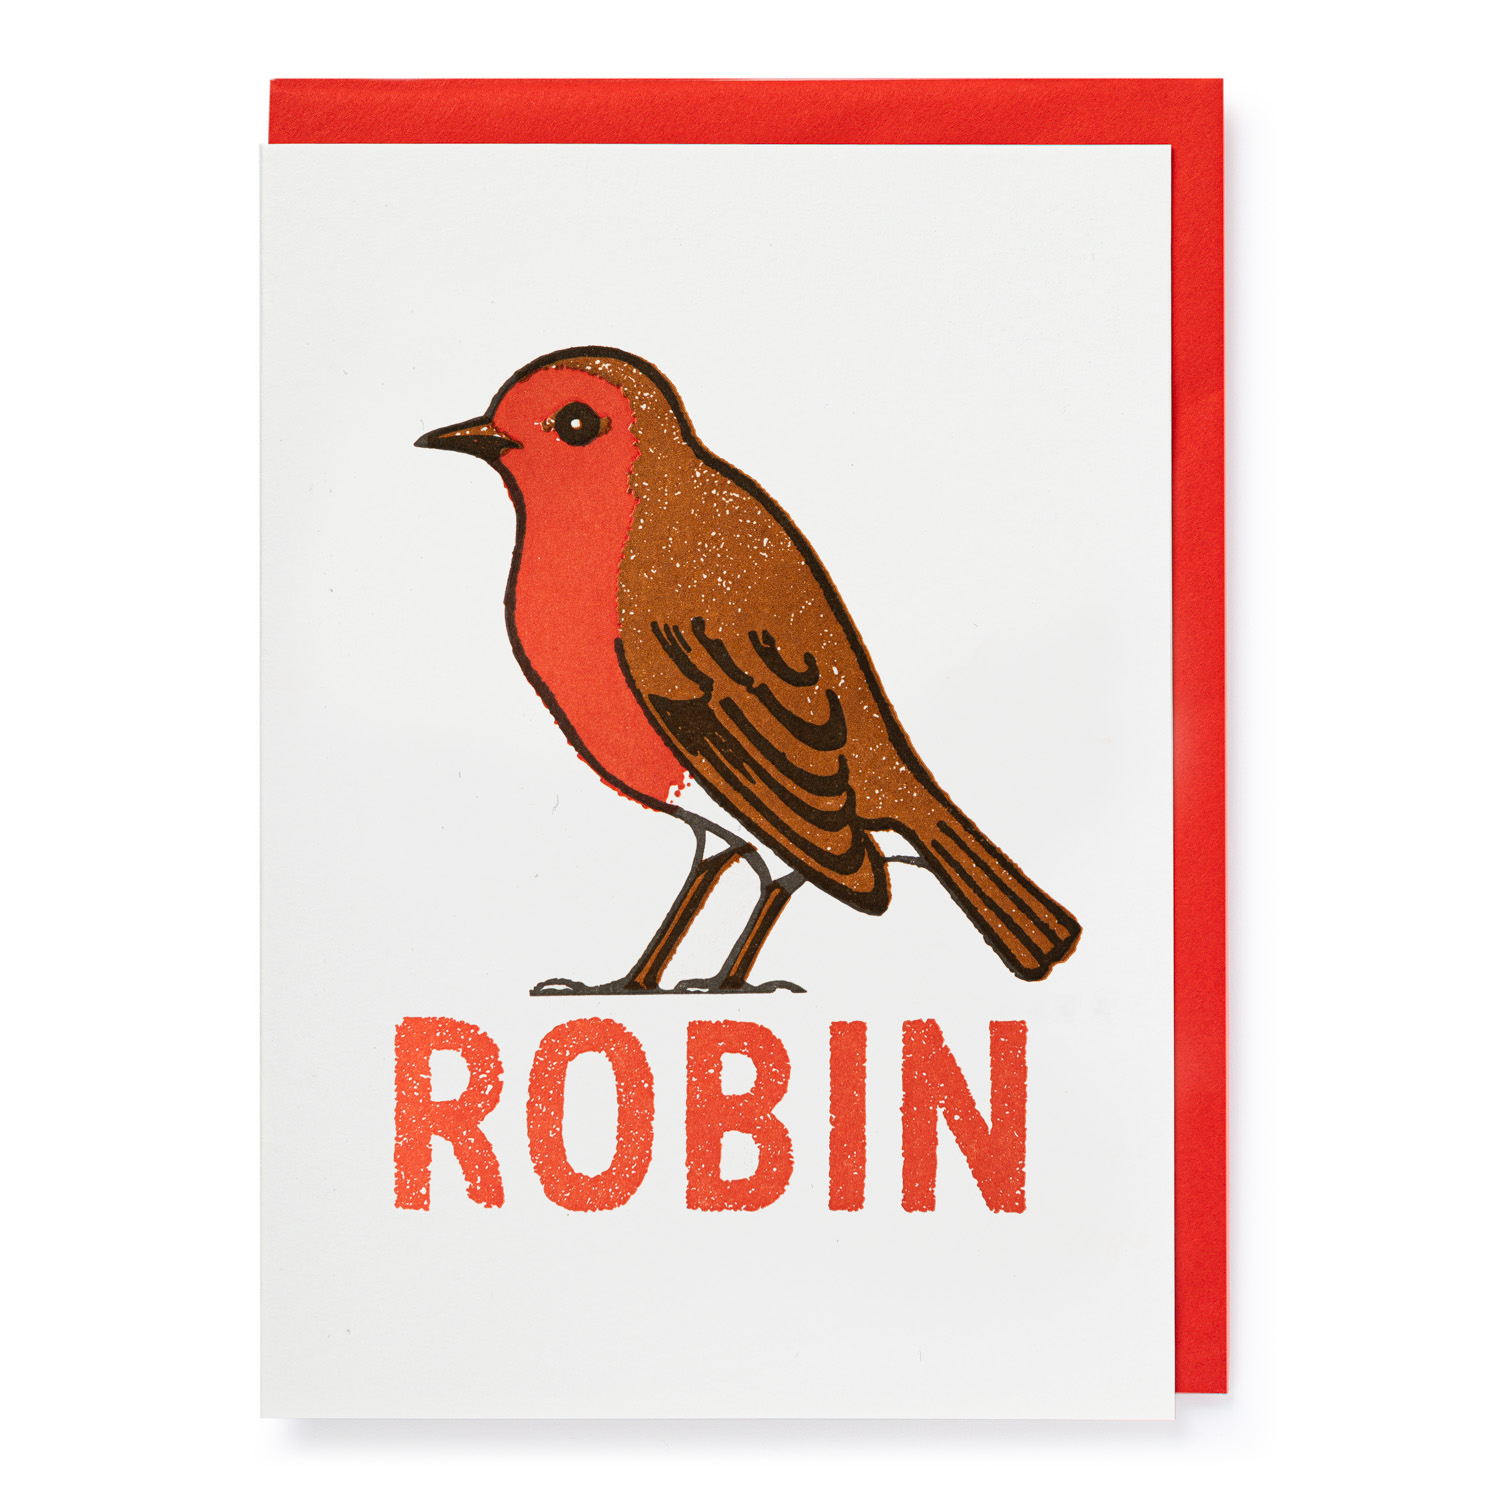 Robin (pack of 5) - Letterpress Cards - Archivist - from Archivist Gallery 